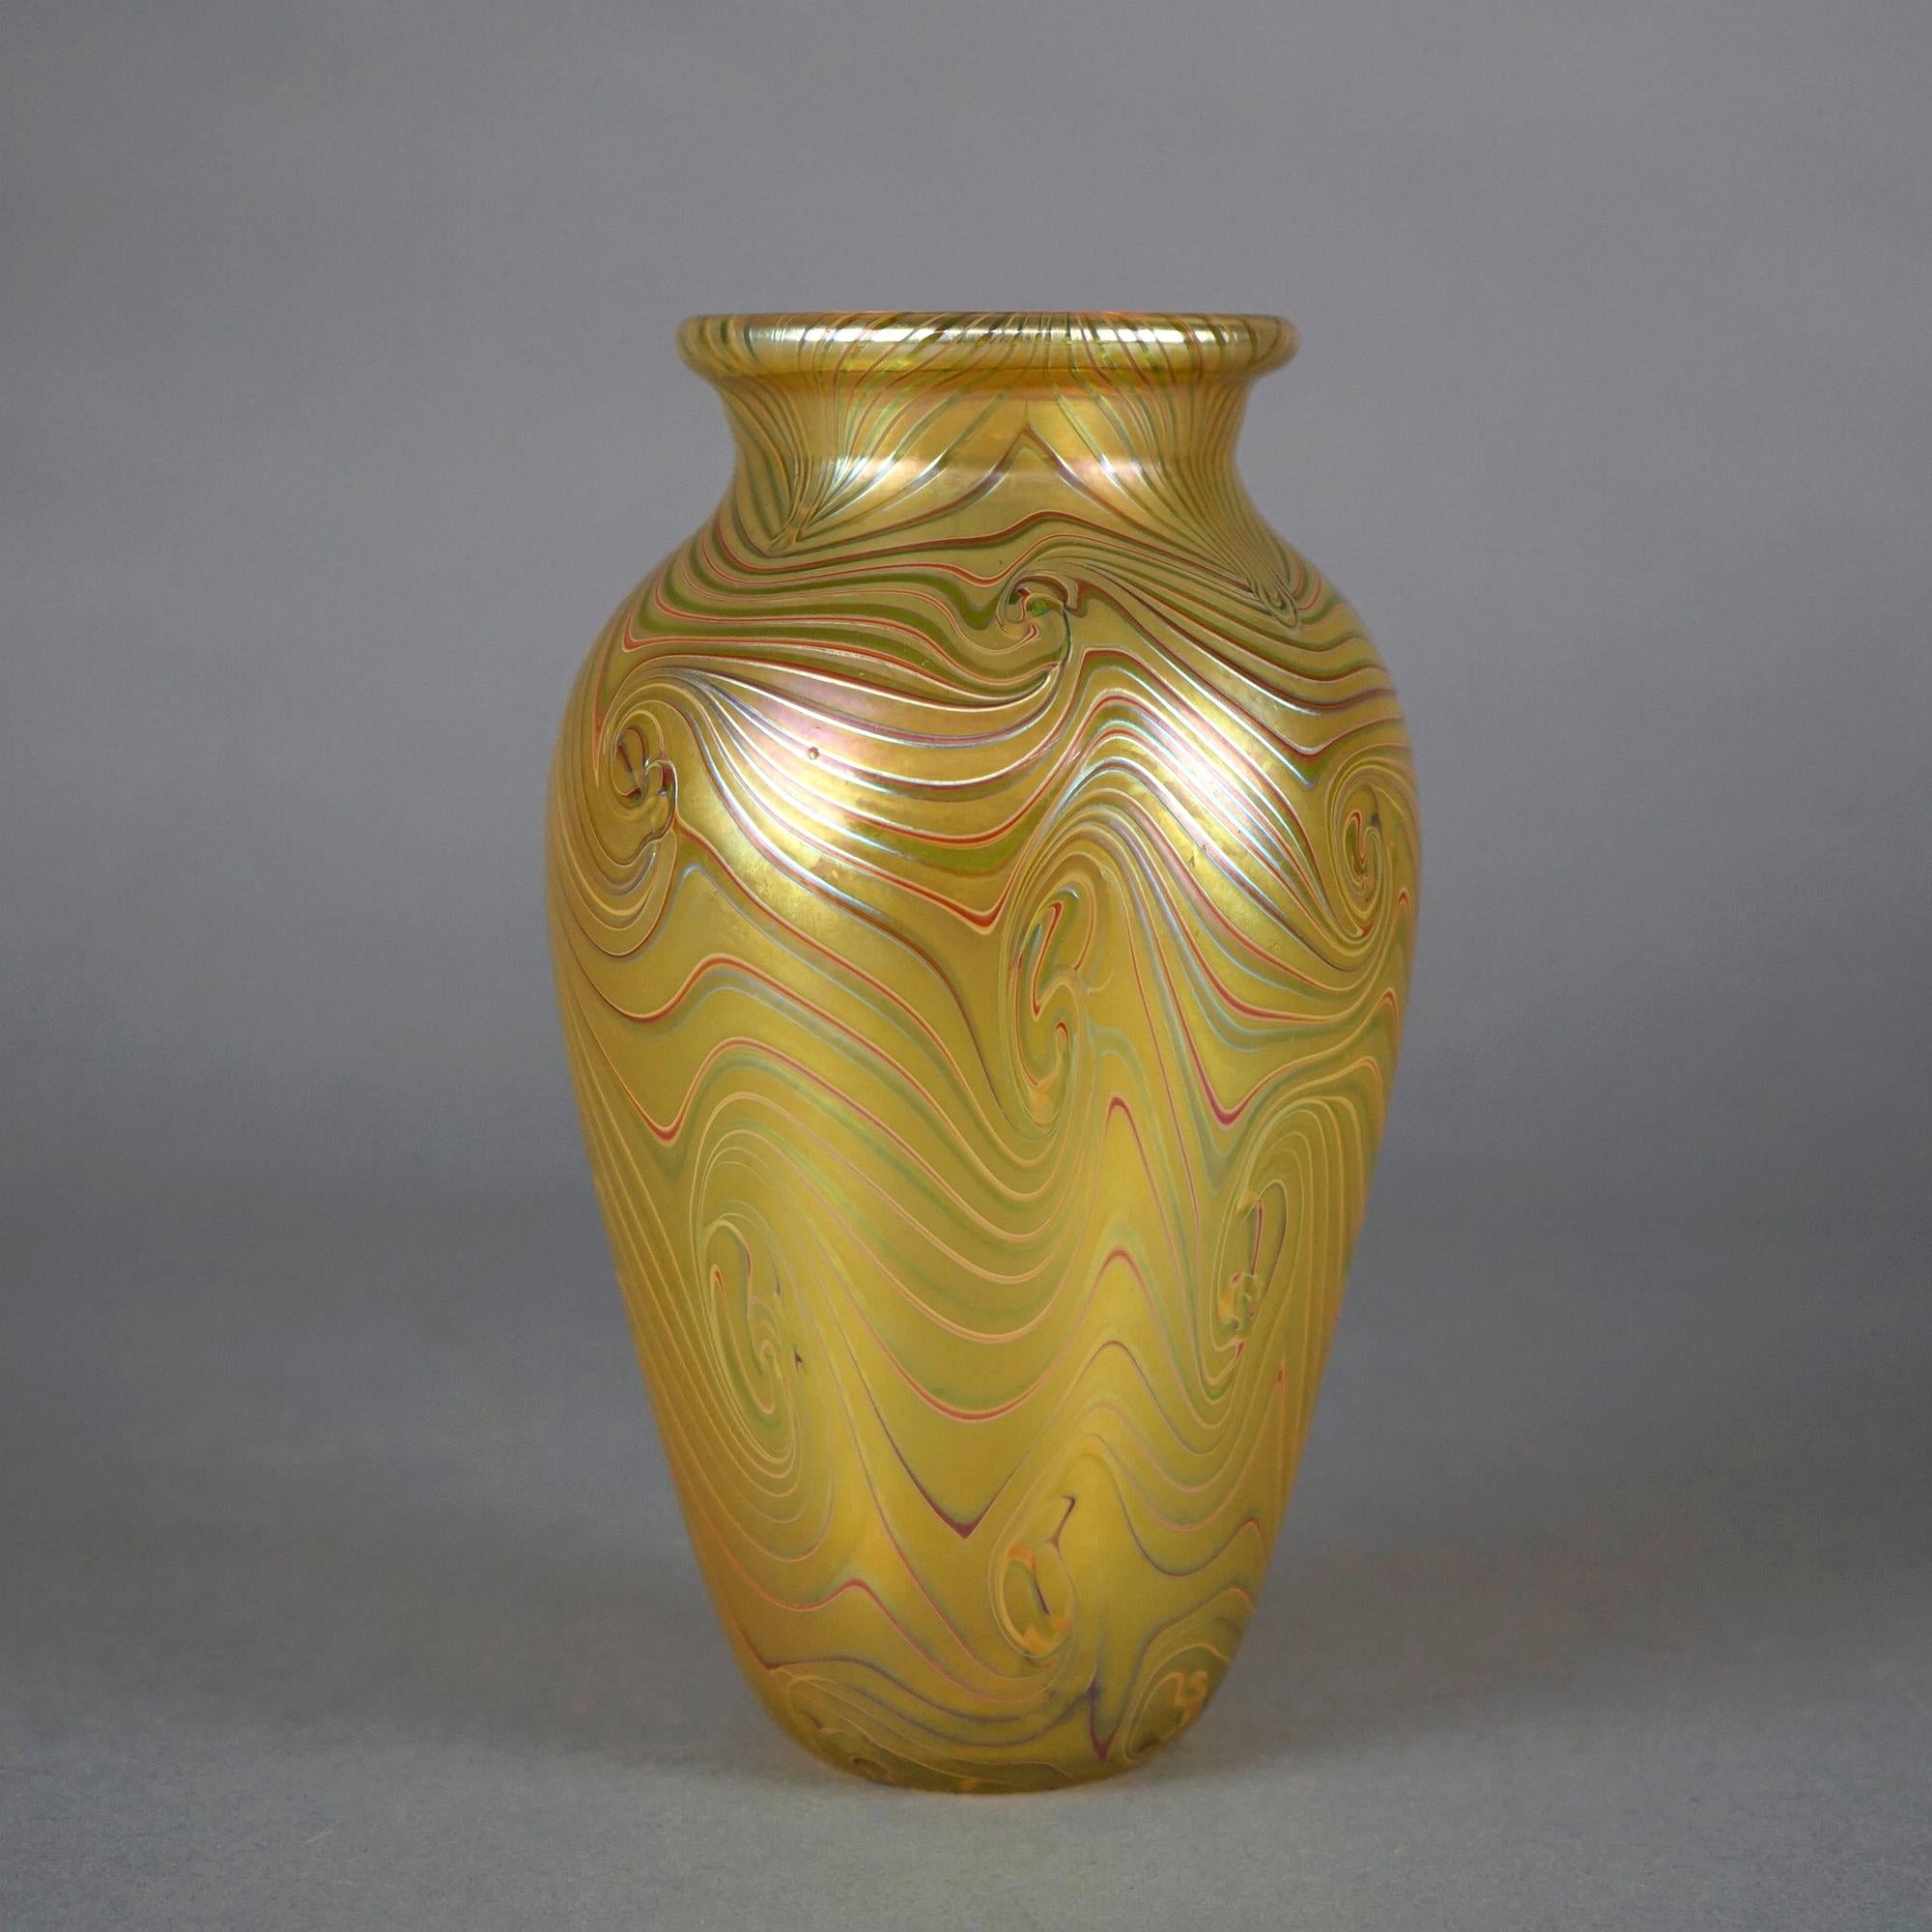 American Artisan Crafted Orient & Flume Gold & Chocolate Art Glass Vase, Signed, 20th C